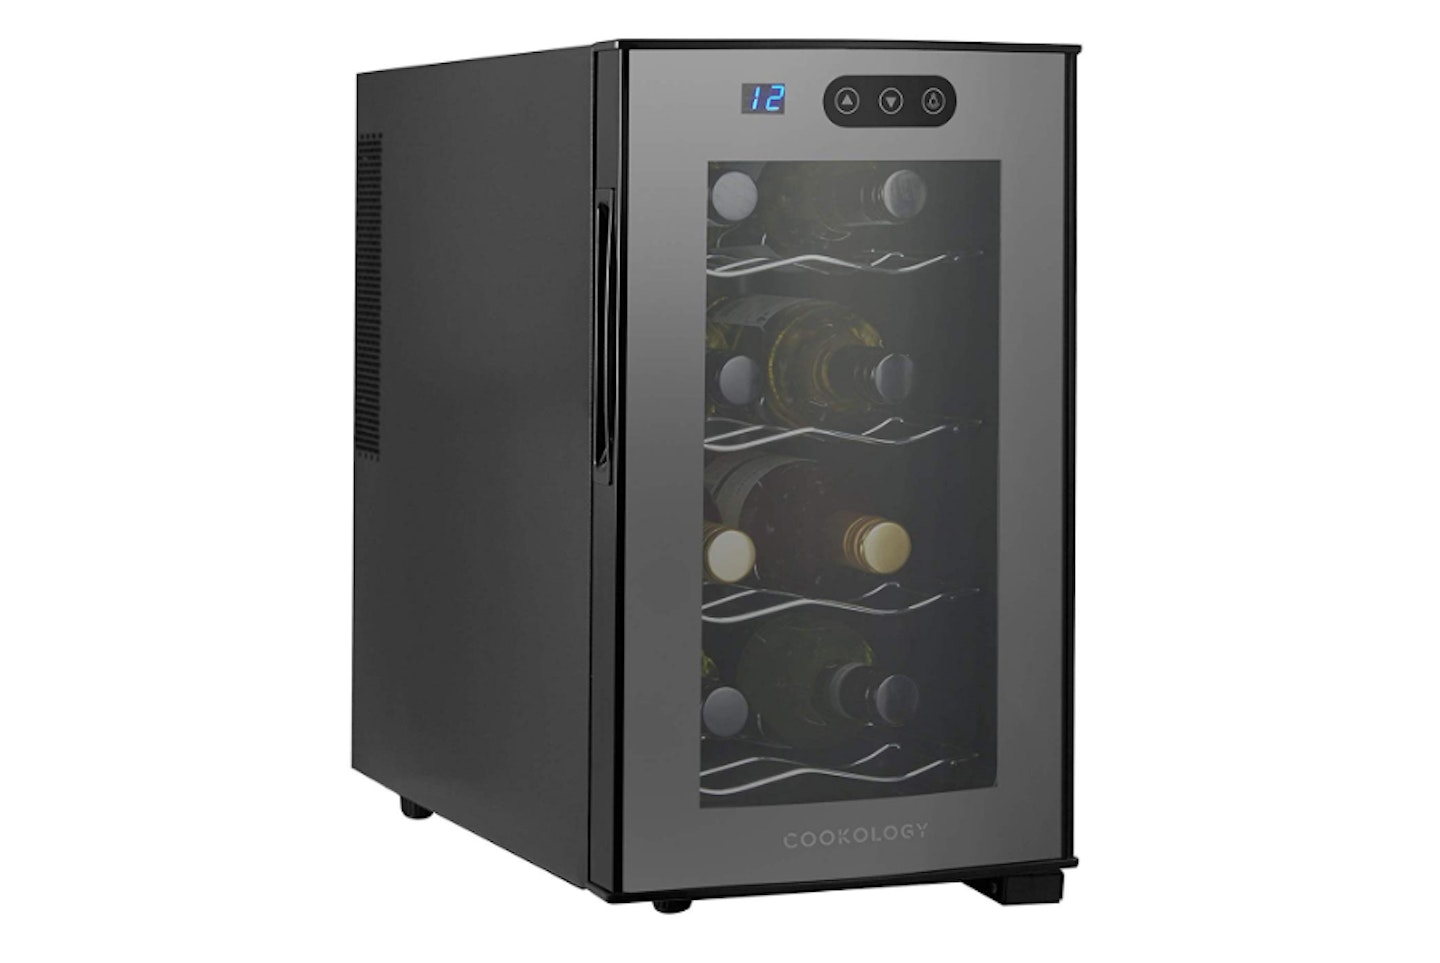 Cookology CW8BK 8 Bottle Thermoelectric Wine Cooler